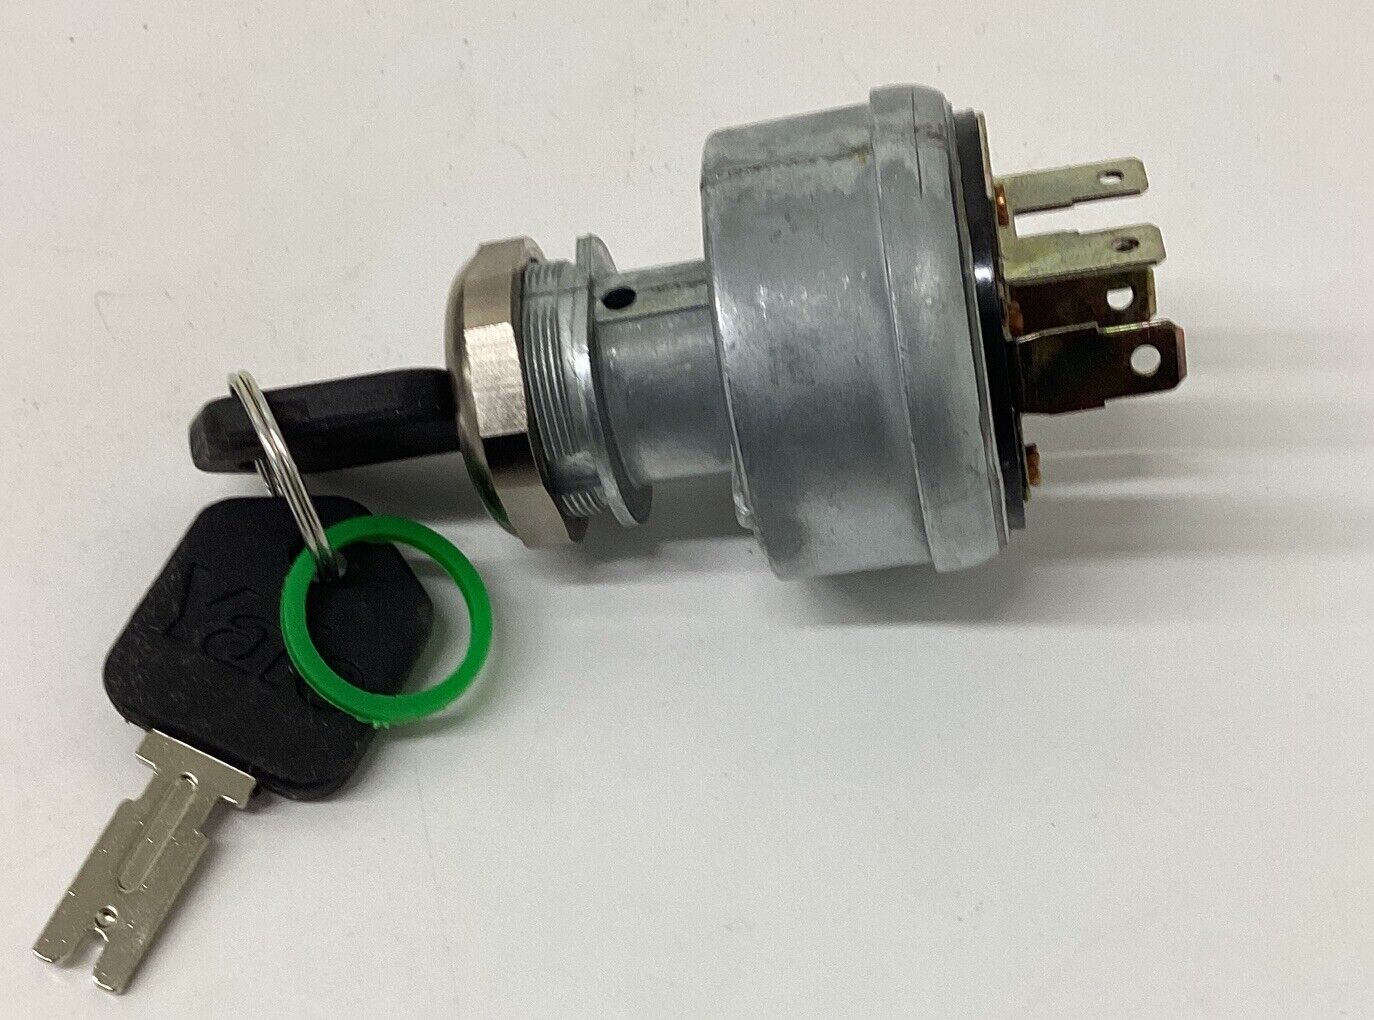 Yale Hyster 504240838 Pollak Ignition Switch (GR207)